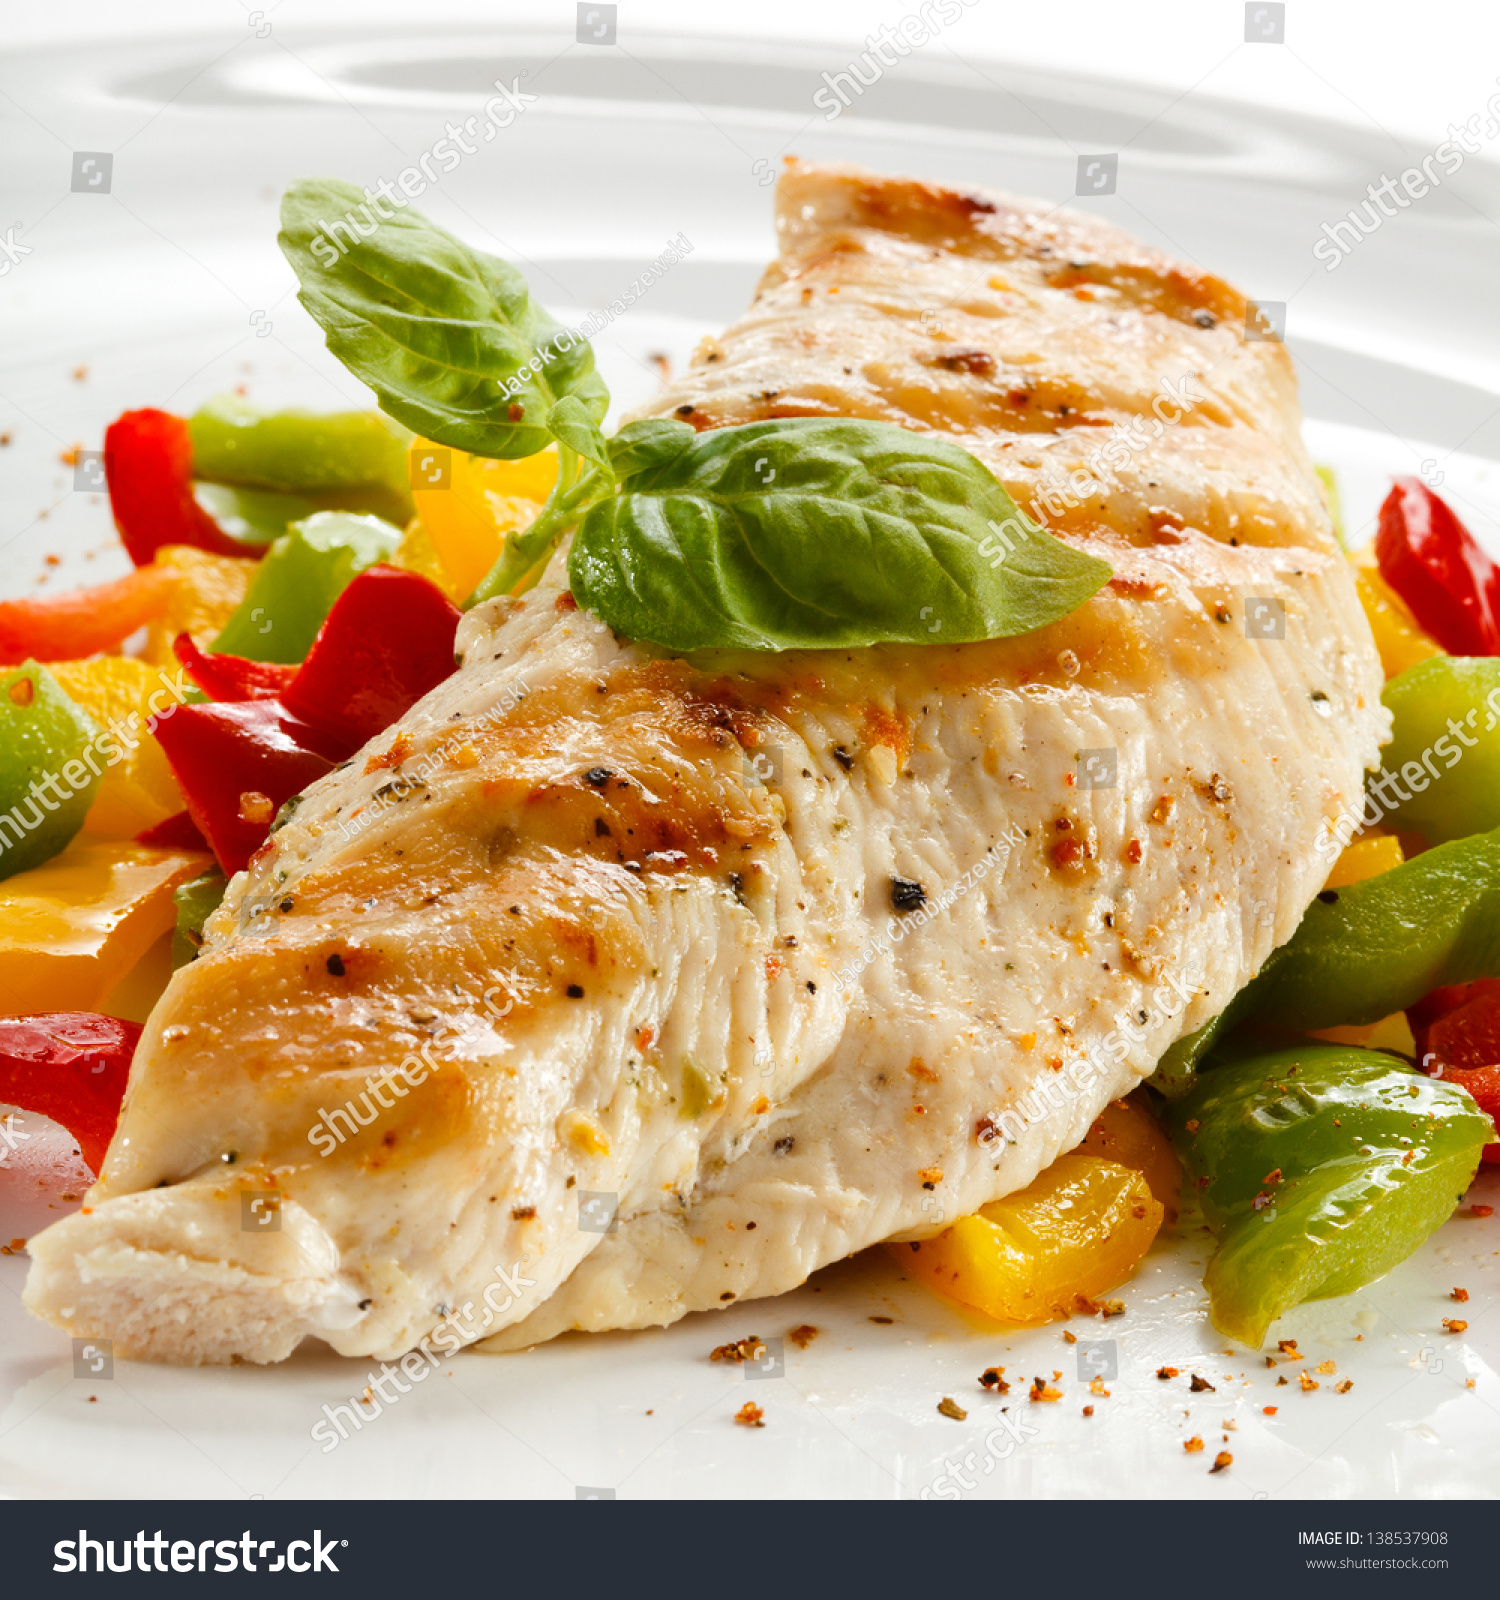 http://image.shutterstock.com/z/stock-photo-grilled-chicken-breasts-and-vegetables-138537908.jpg